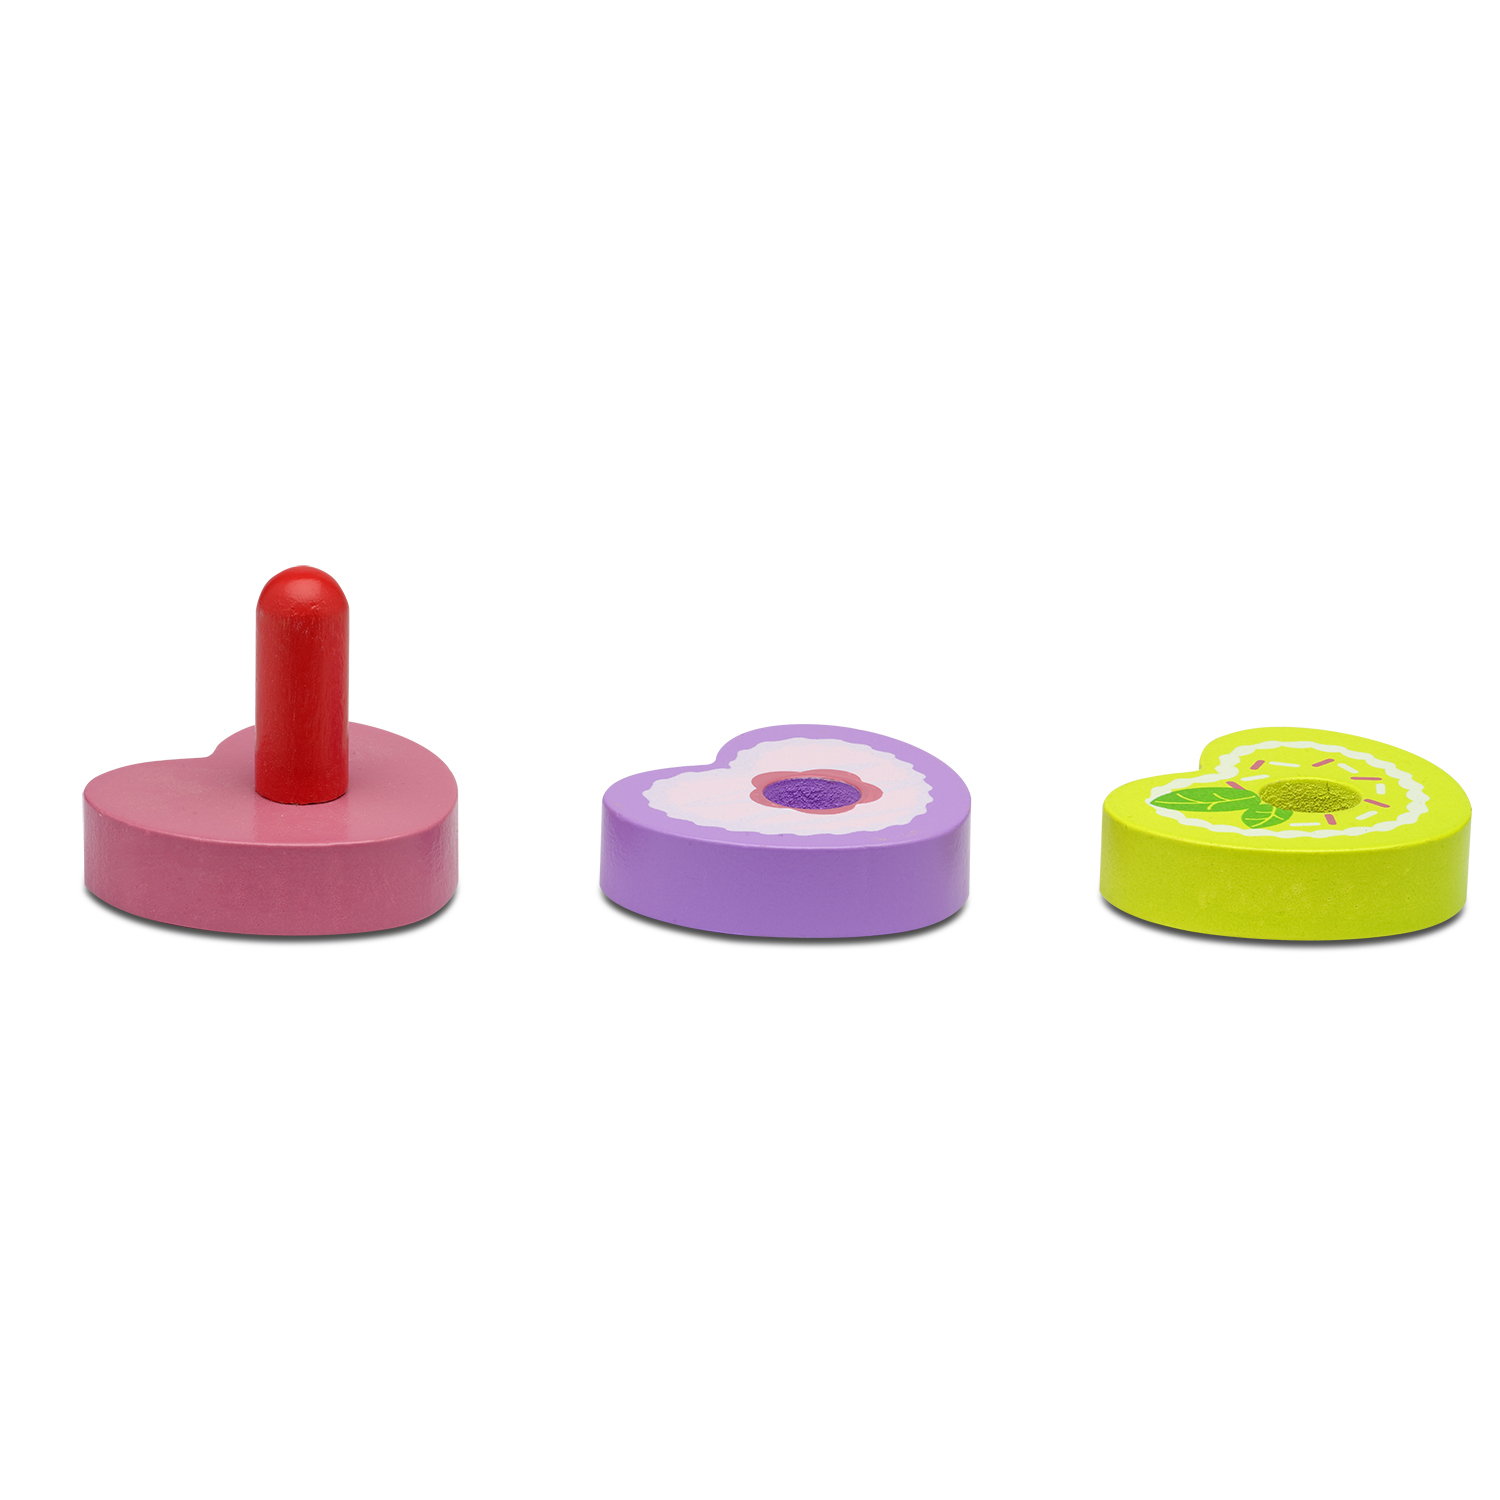 Wooden toys micki cake stand with toy cakes